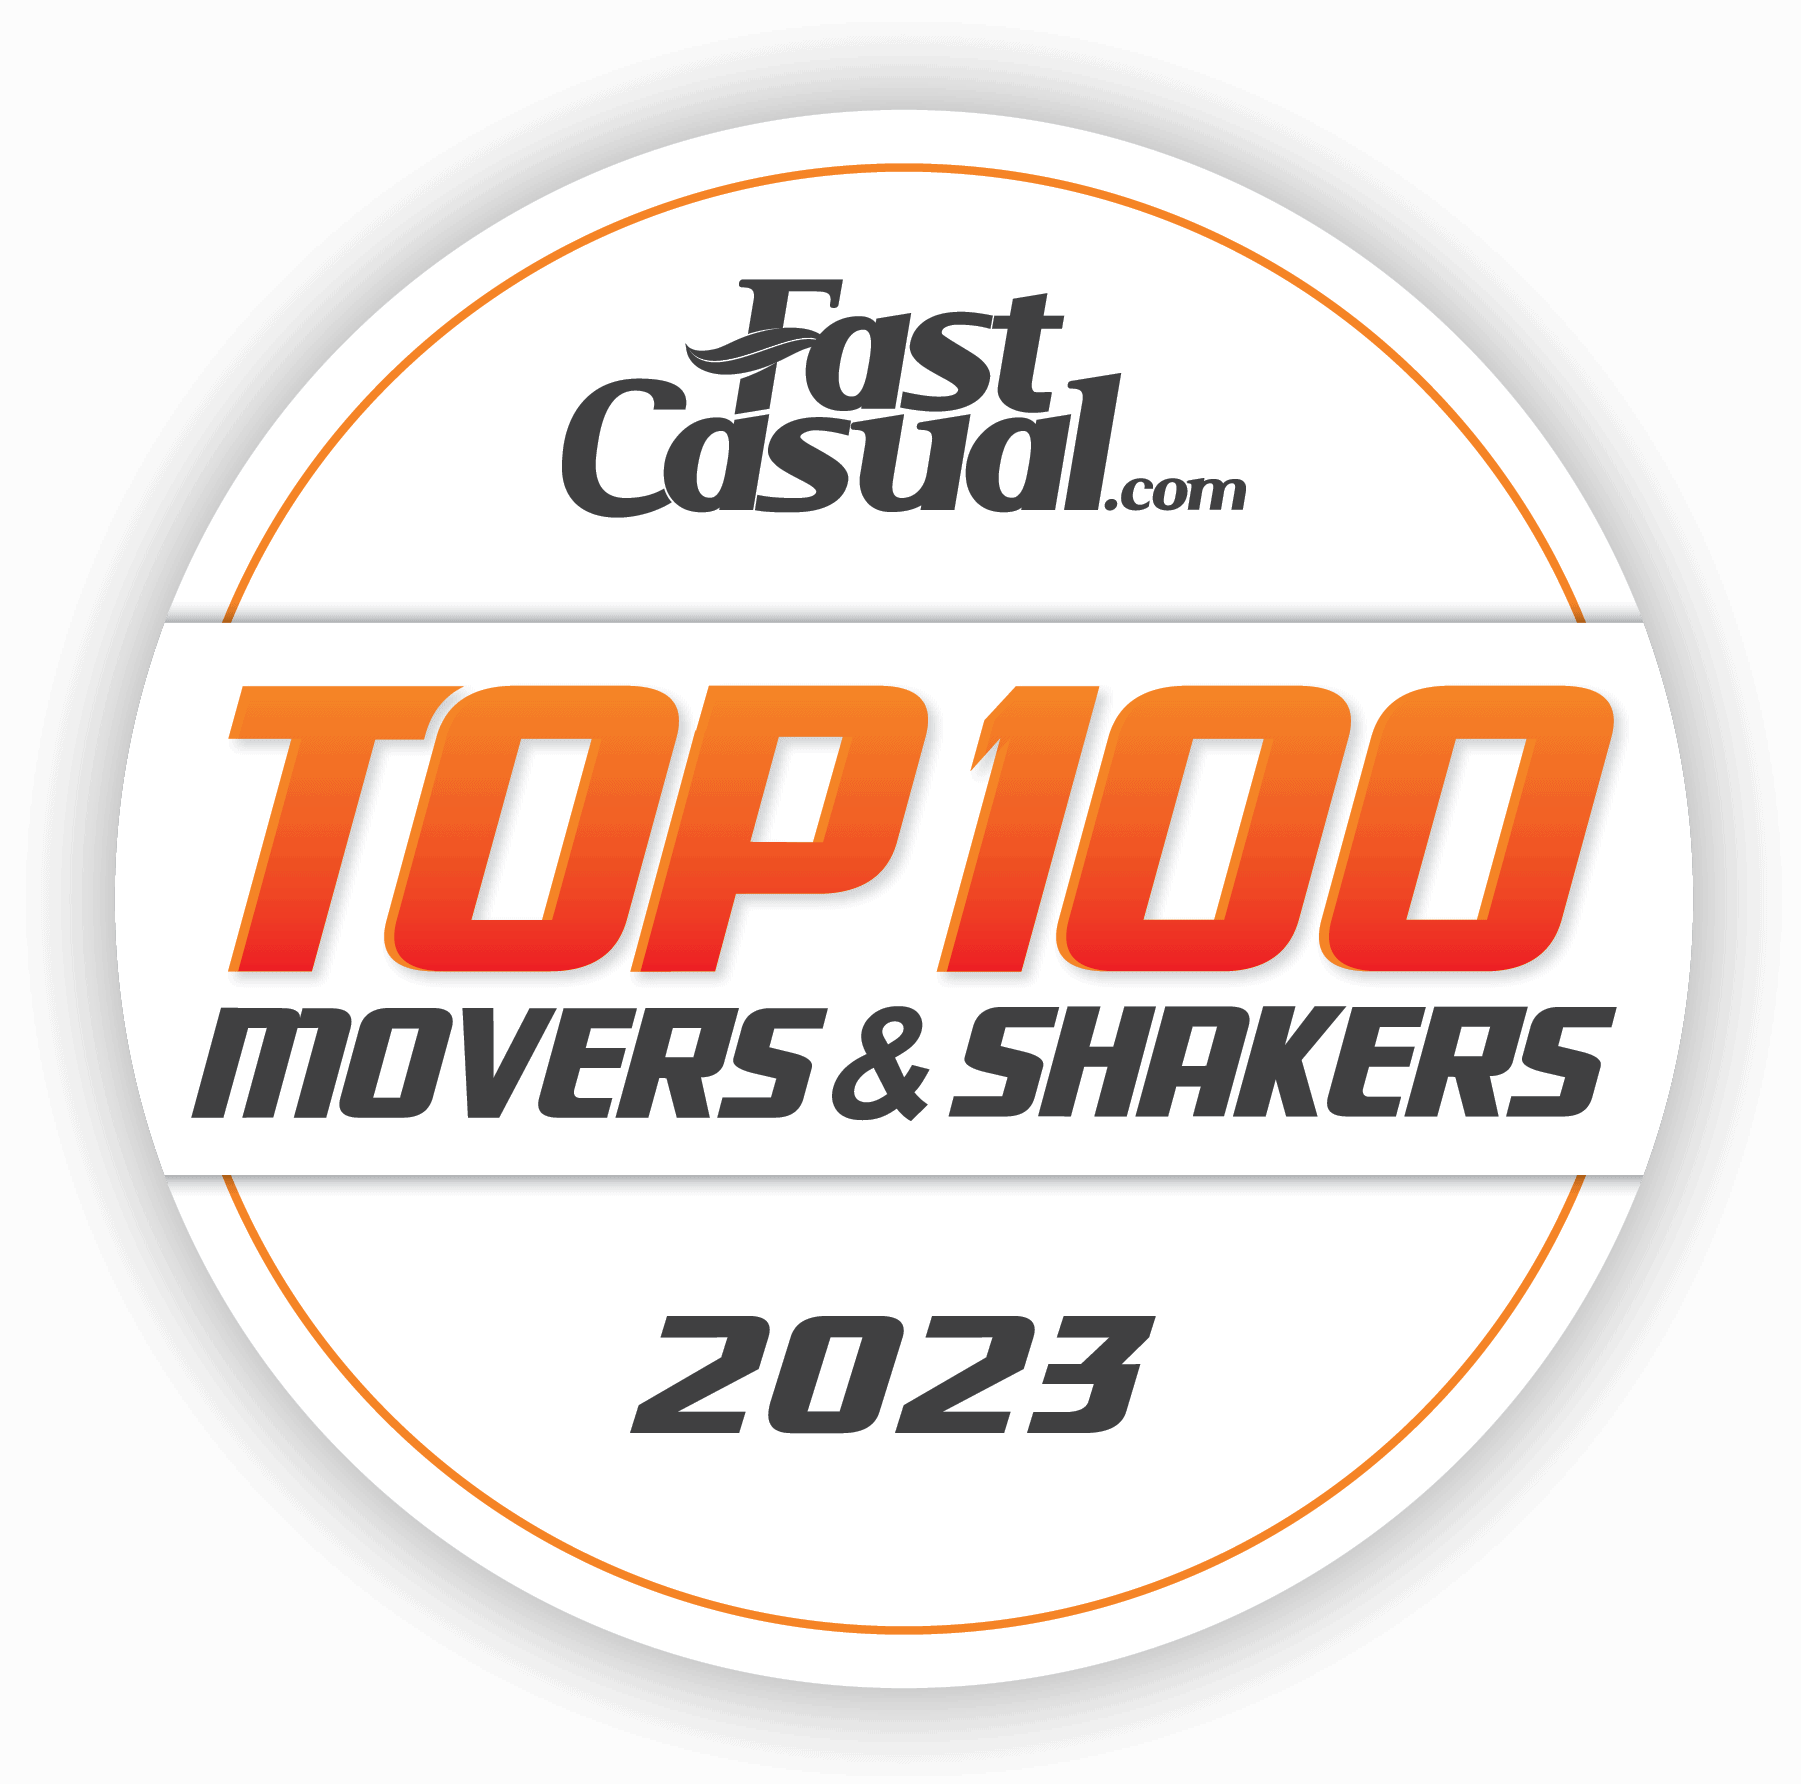 Fast Casual Top 100 Movers & Shakers 2023